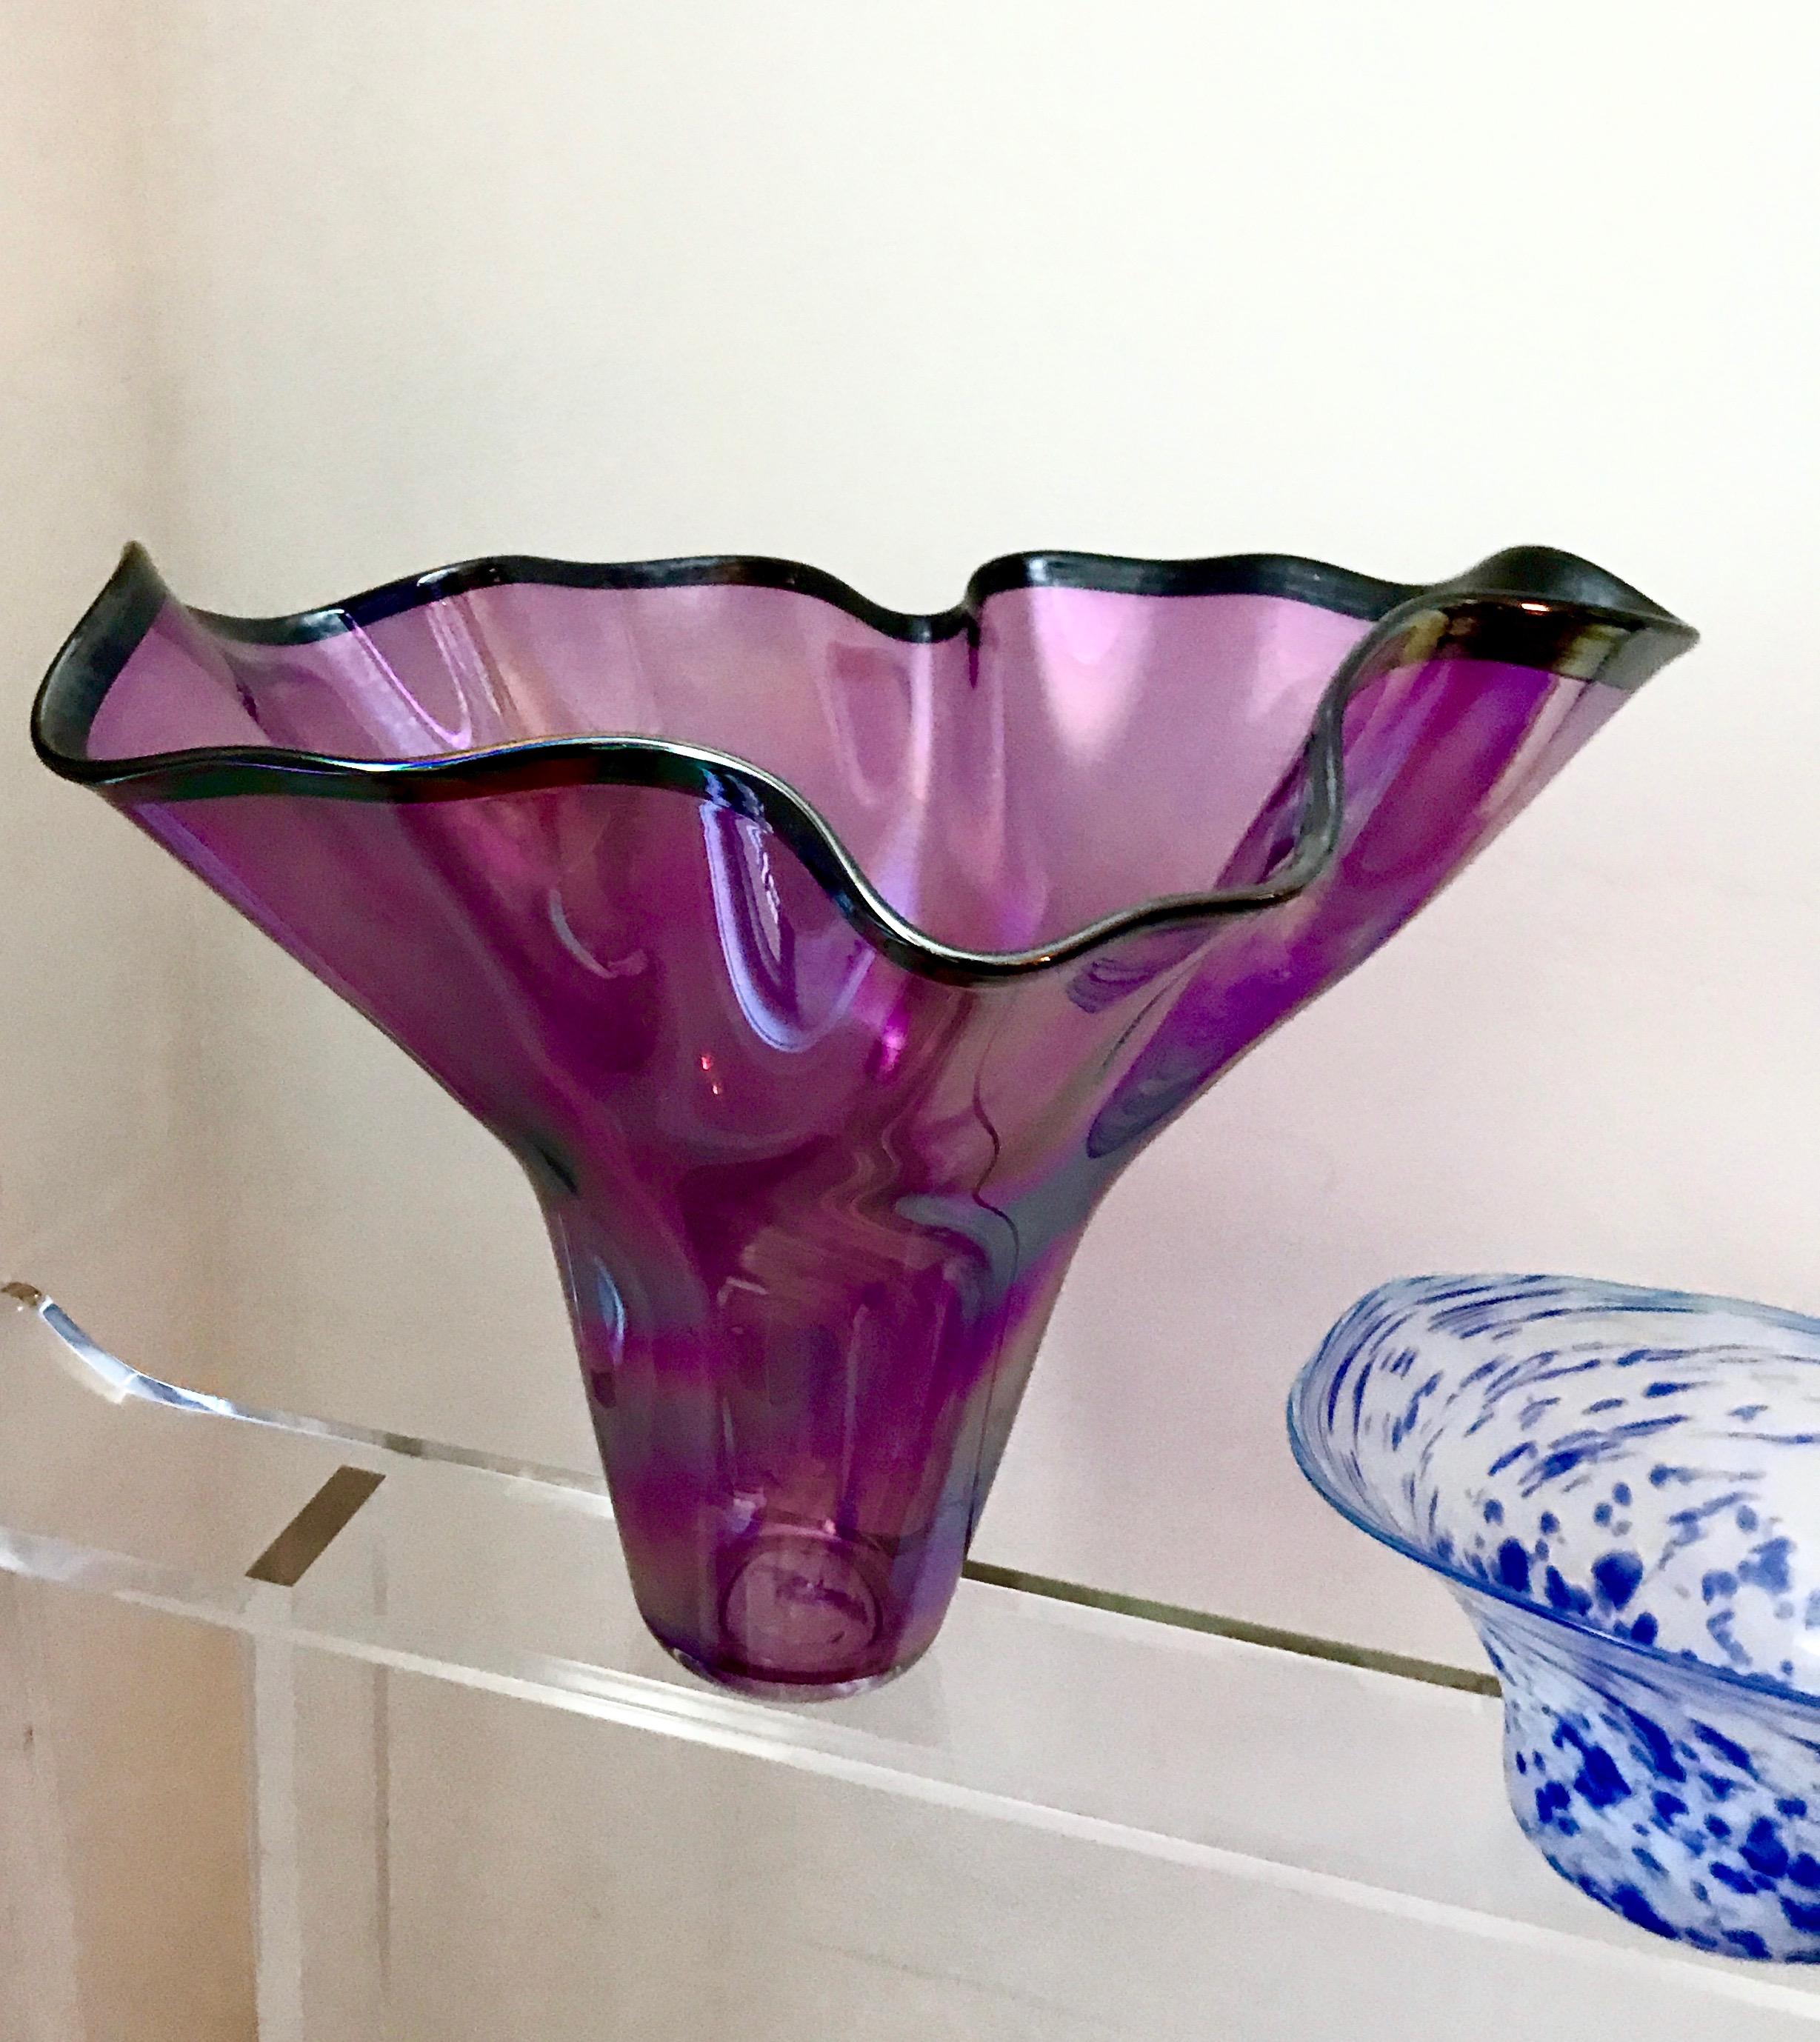 Gorgeous pair of midcentury Murano vases / vessels in the organic modern abstraction, reminiscent of Dave Chihuly. Speckled white and blue glass and iridescent violet glass. Dimensions below are approximate.